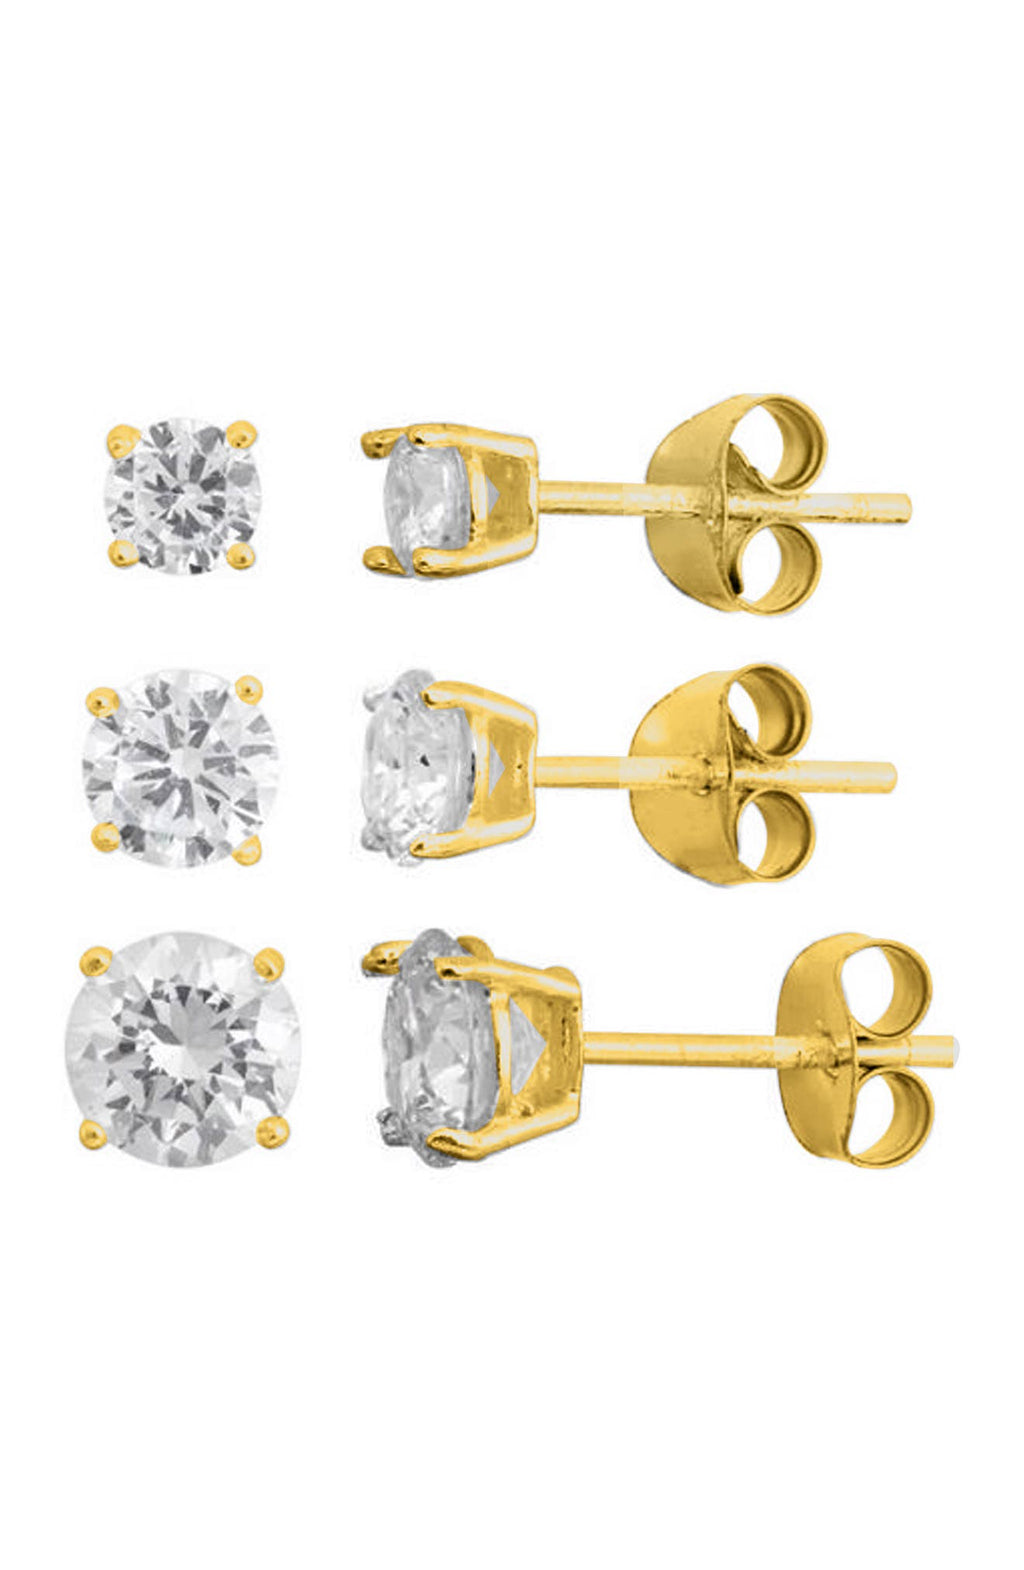 SAVVY CIE JEWELS 18K Yellow Gold Vermeil Prong Set Round CZ Stud Earrings - Set of 3, Main, color, YELLOW